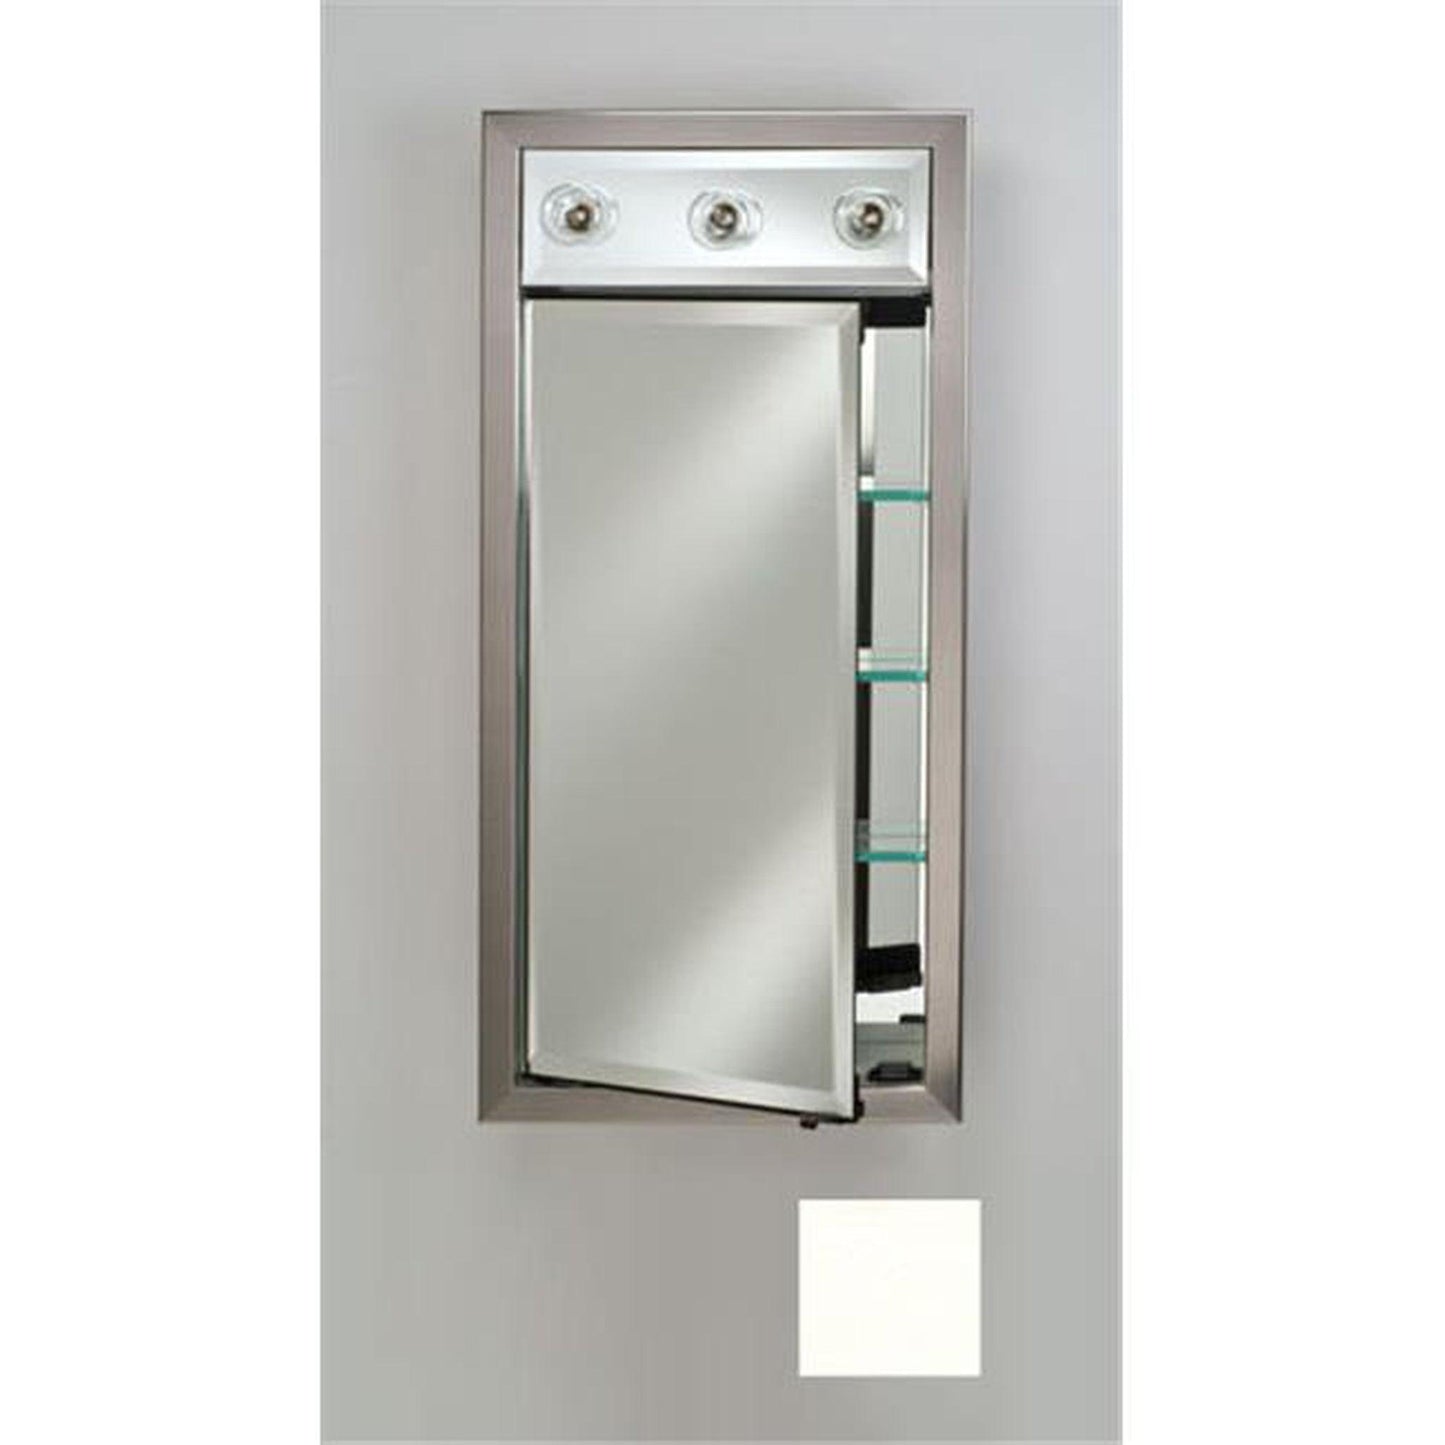 Afina Signature 17" x 34" Colorgrain White Recessed Left Hinged Single Door Medicine Cabinet With Contemporary Lights